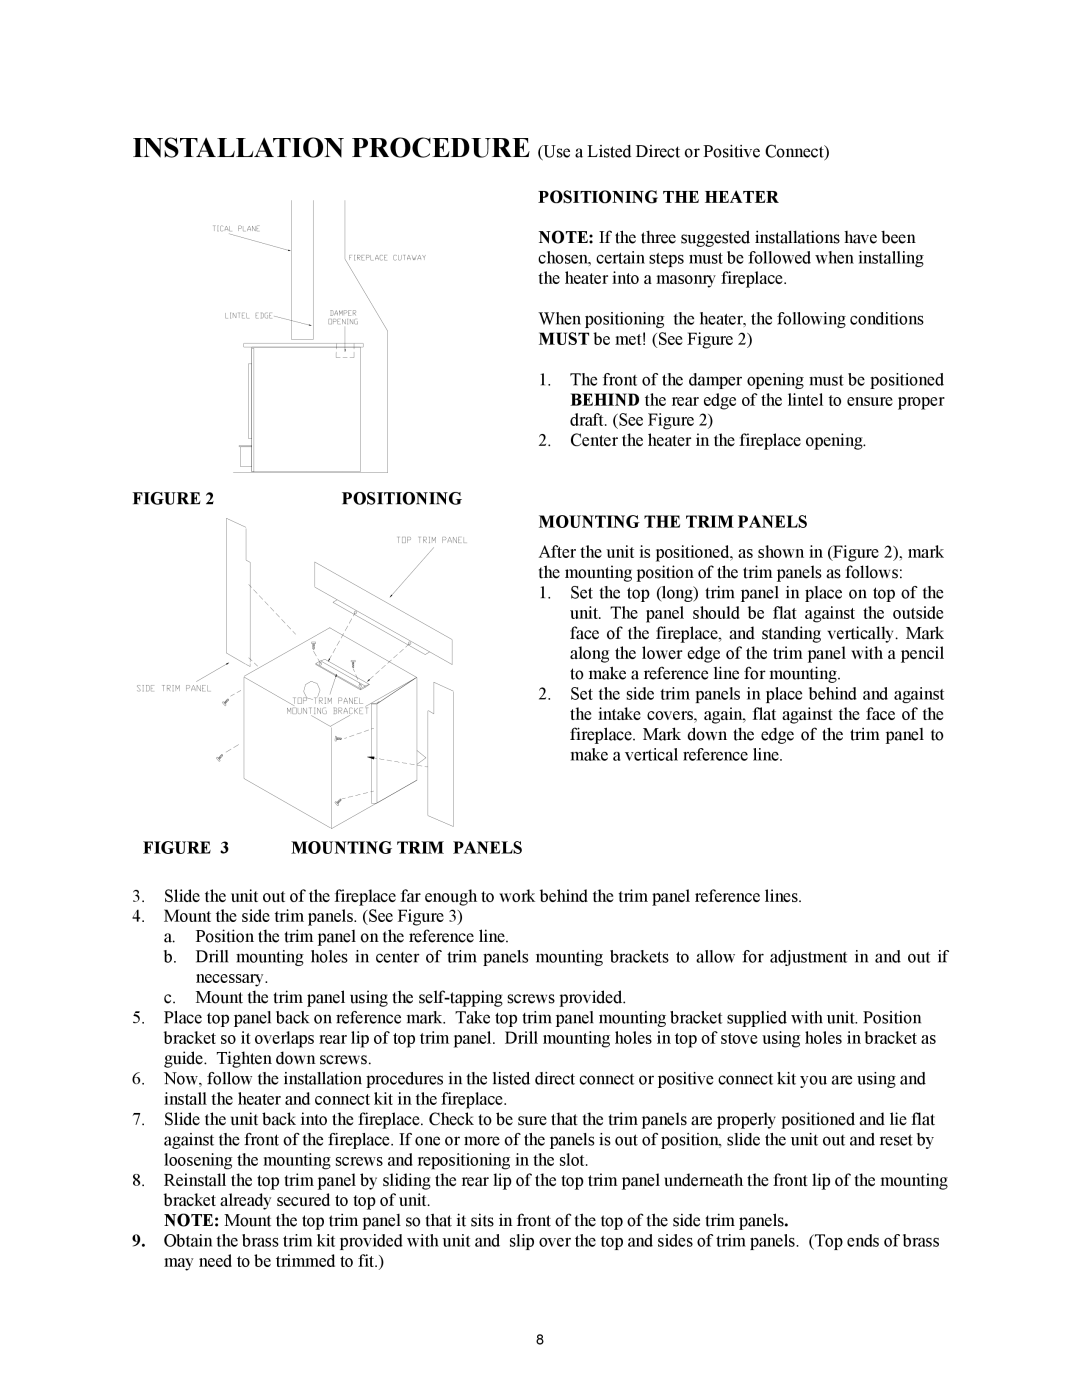 New Buck Corporation 21 installation instructions Positioning The Heater, Mounting The Trim Panels, Mounting Trim Panels 